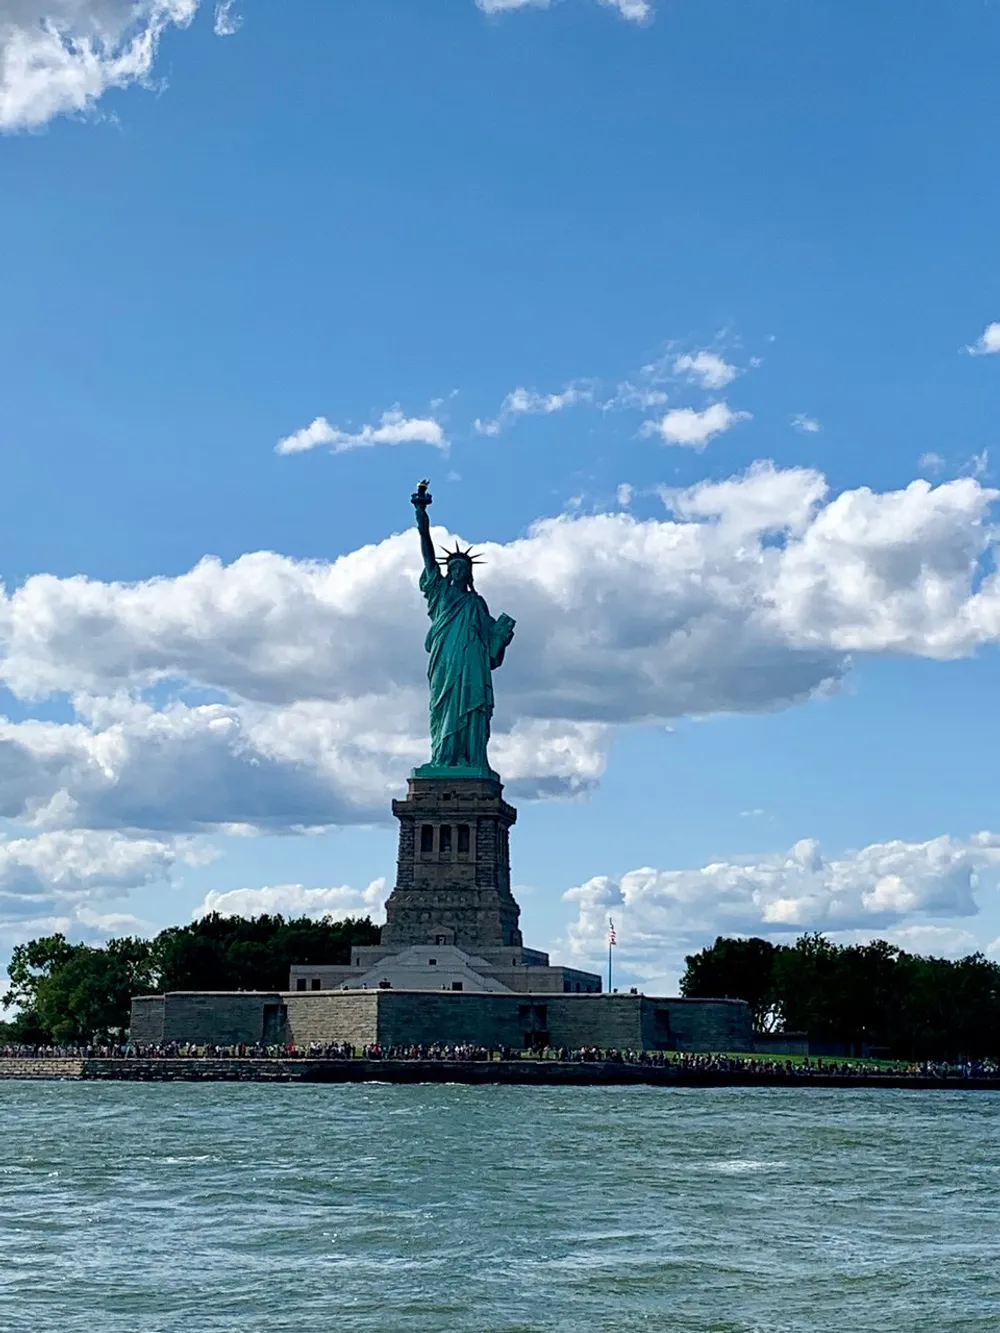 The image shows the Statue of Liberty standing tall against a backdrop of a partly cloudy sky with a crowd of visitors at its base and the waters of New York Harbor in the foreground